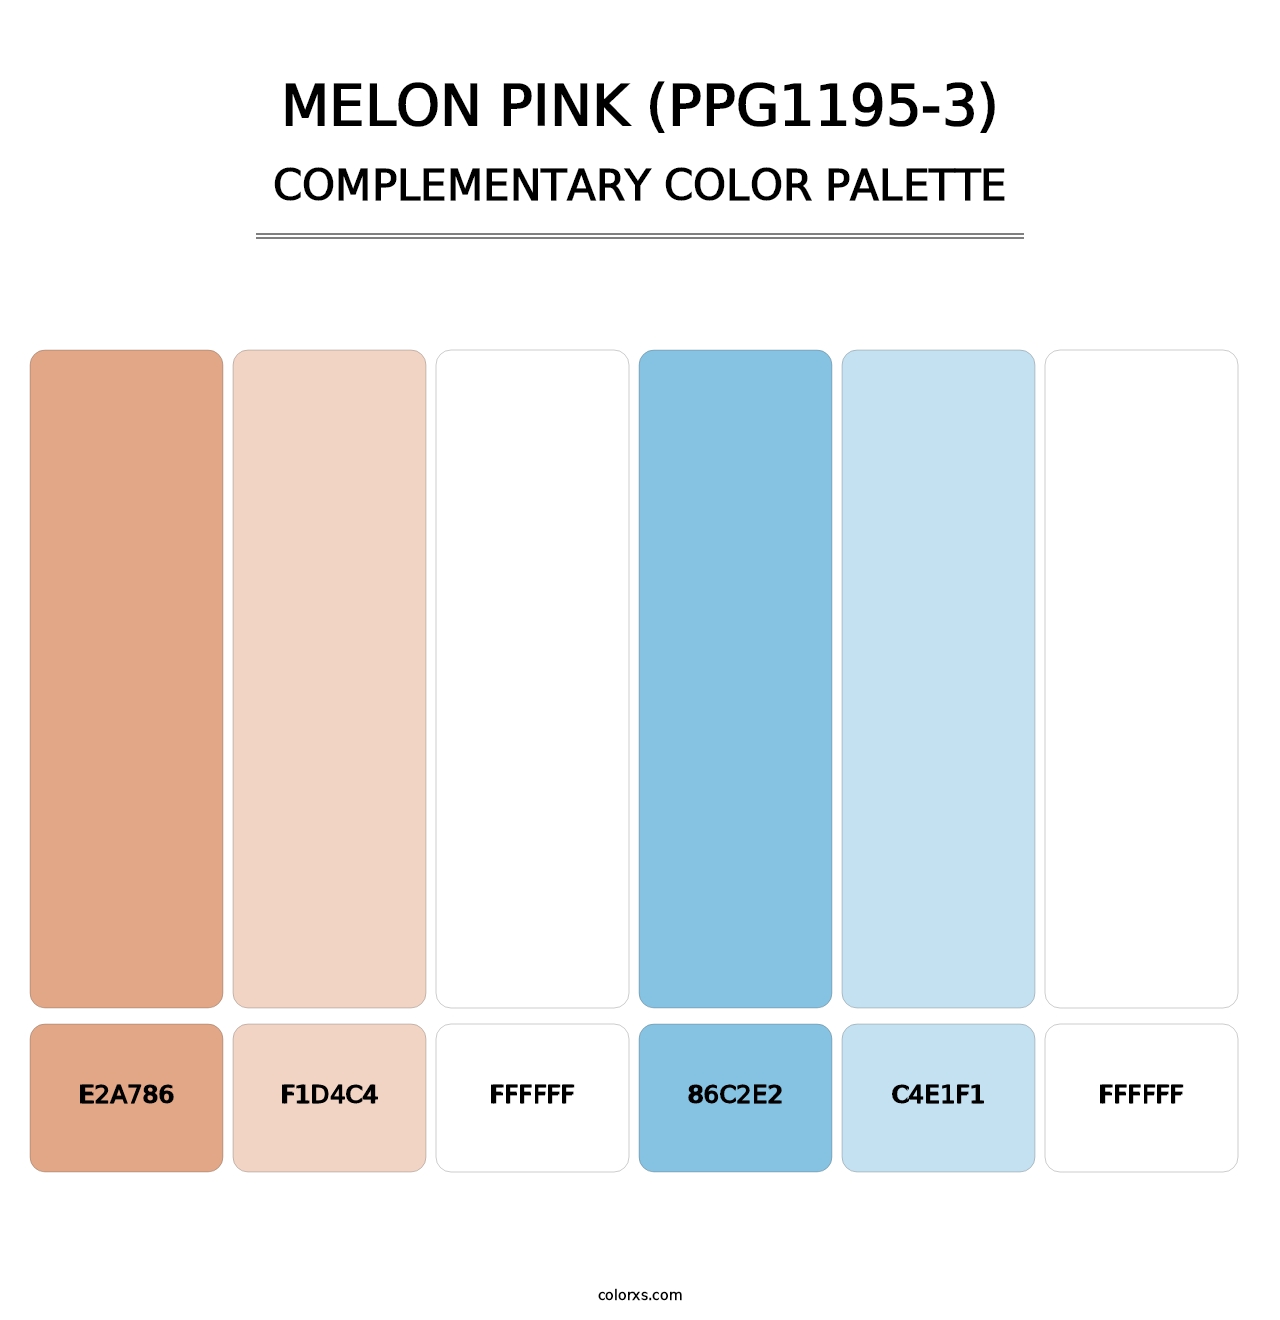 Melon Pink (PPG1195-3) - Complementary Color Palette